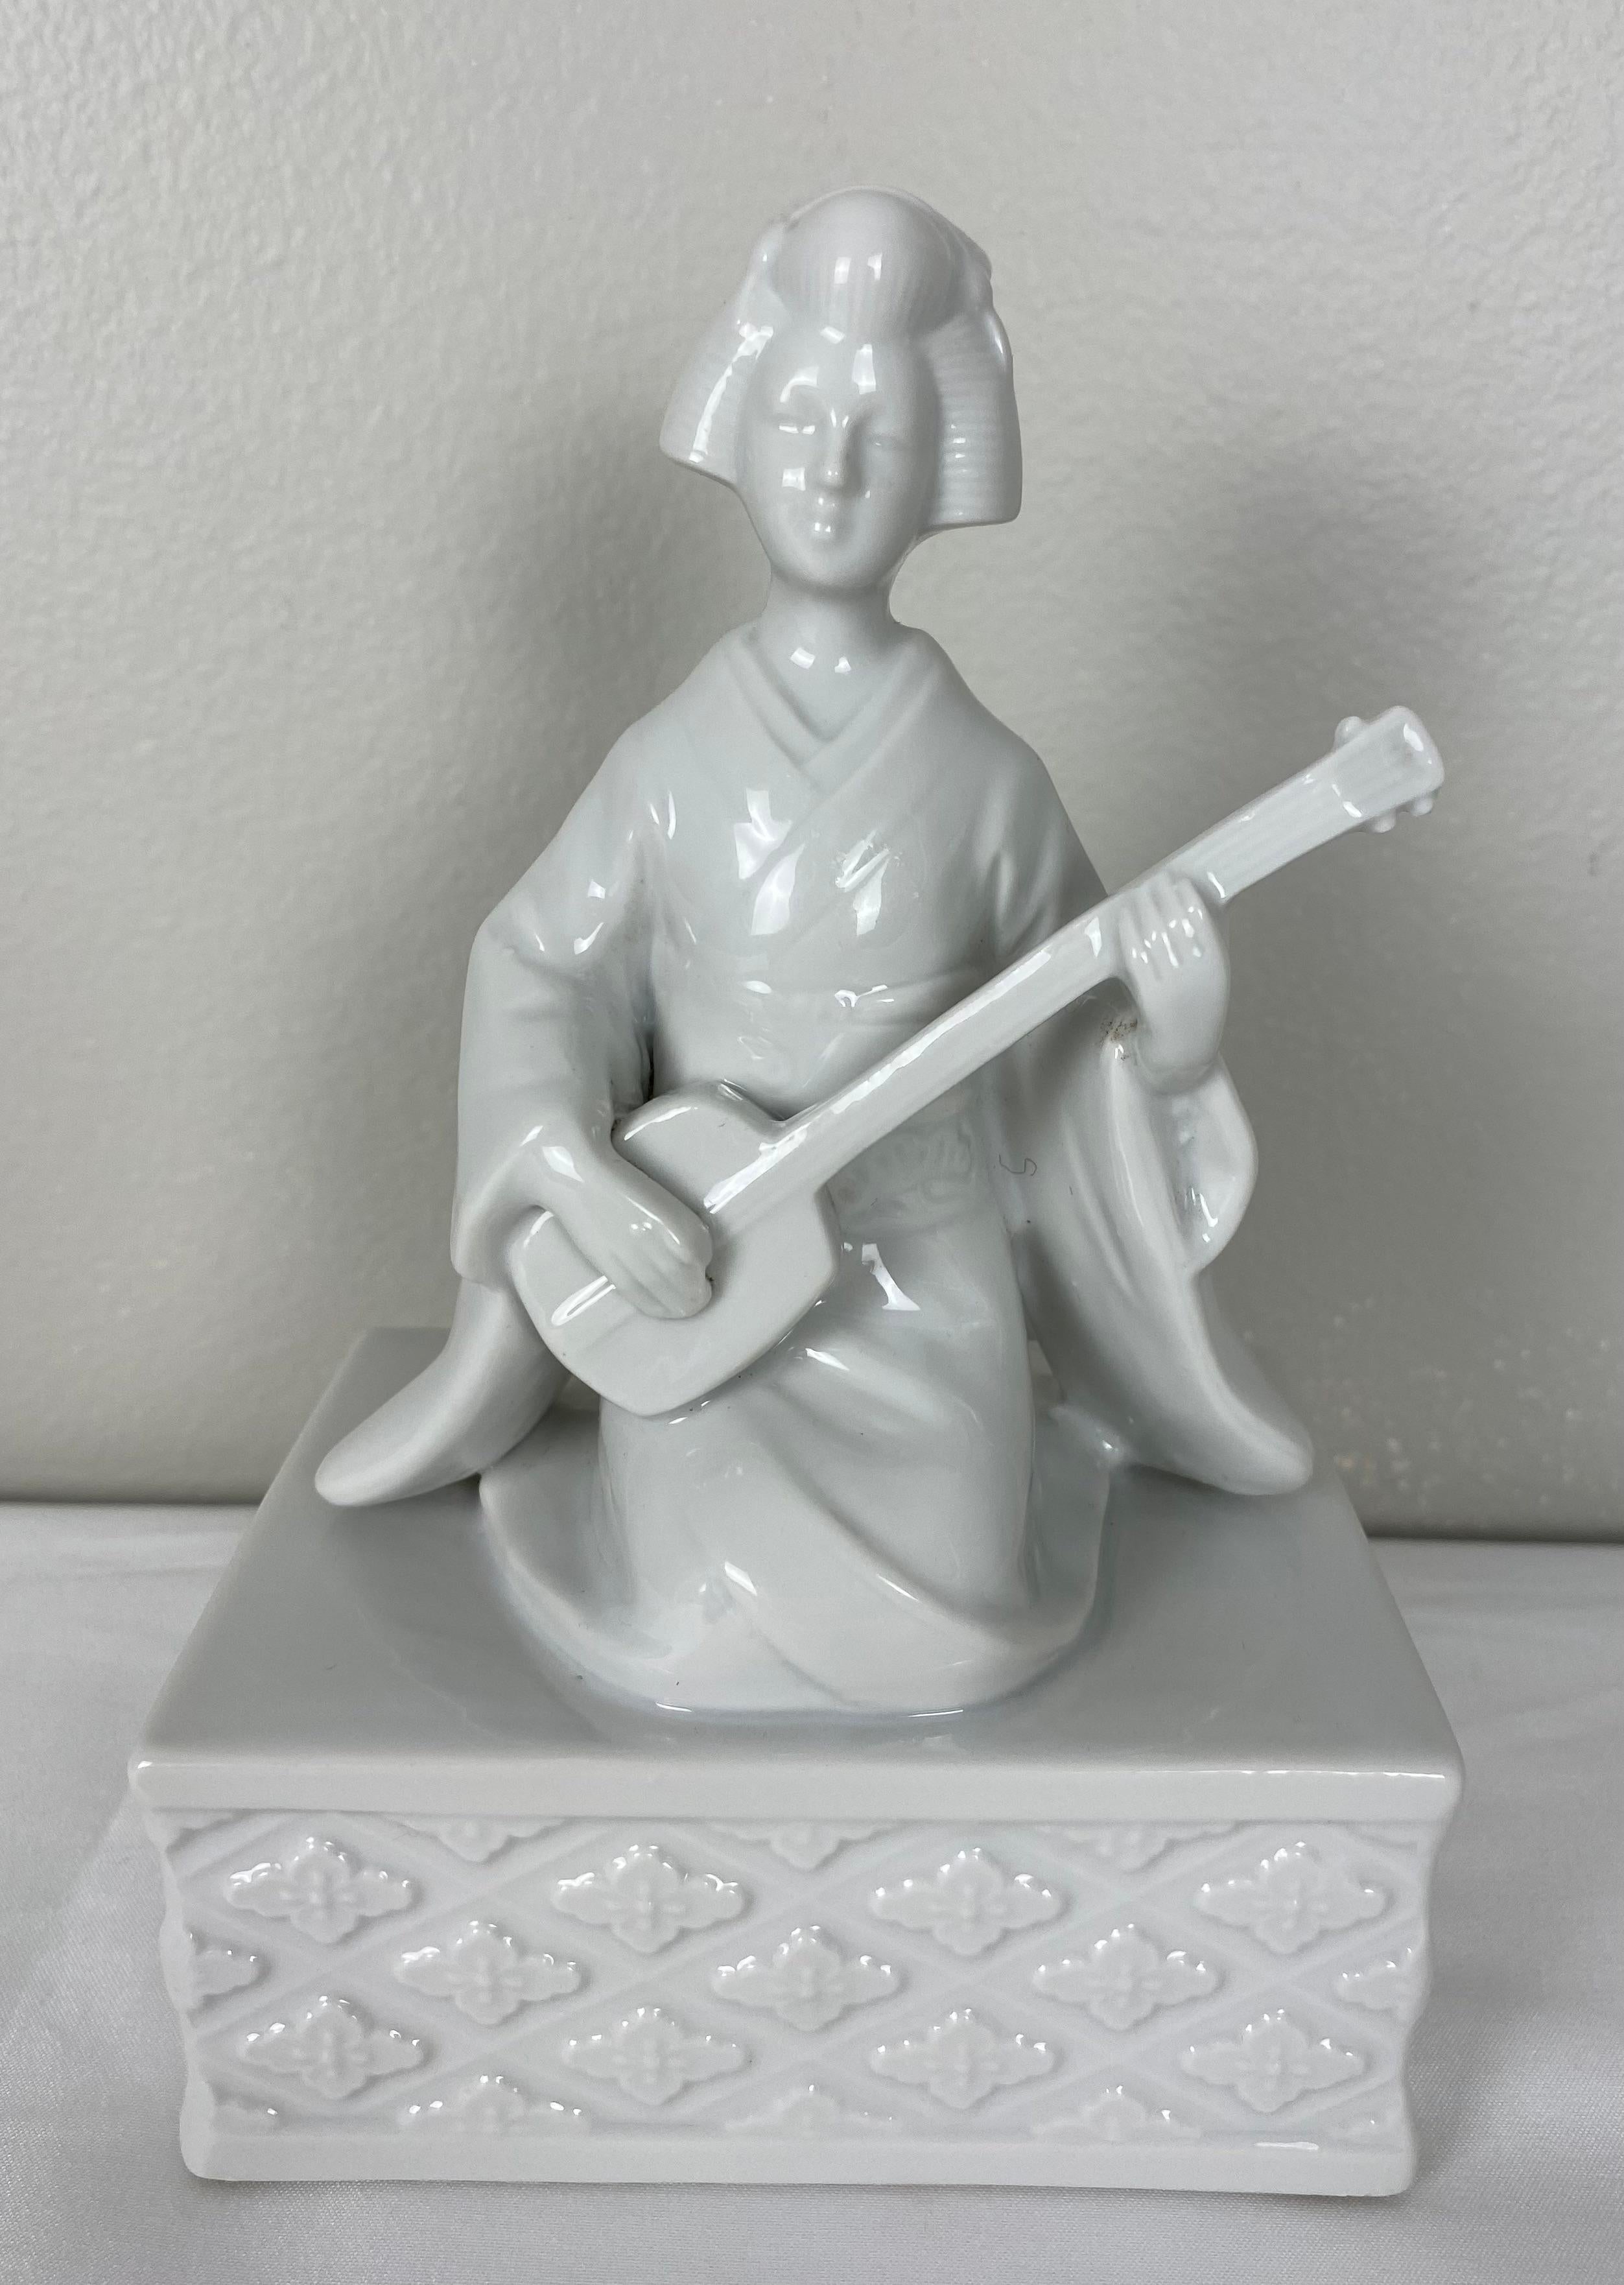 Japanese Lladro Style Figurines White Porcelain Music Boxes and Decorative Tree In Good Condition For Sale In Miami, FL